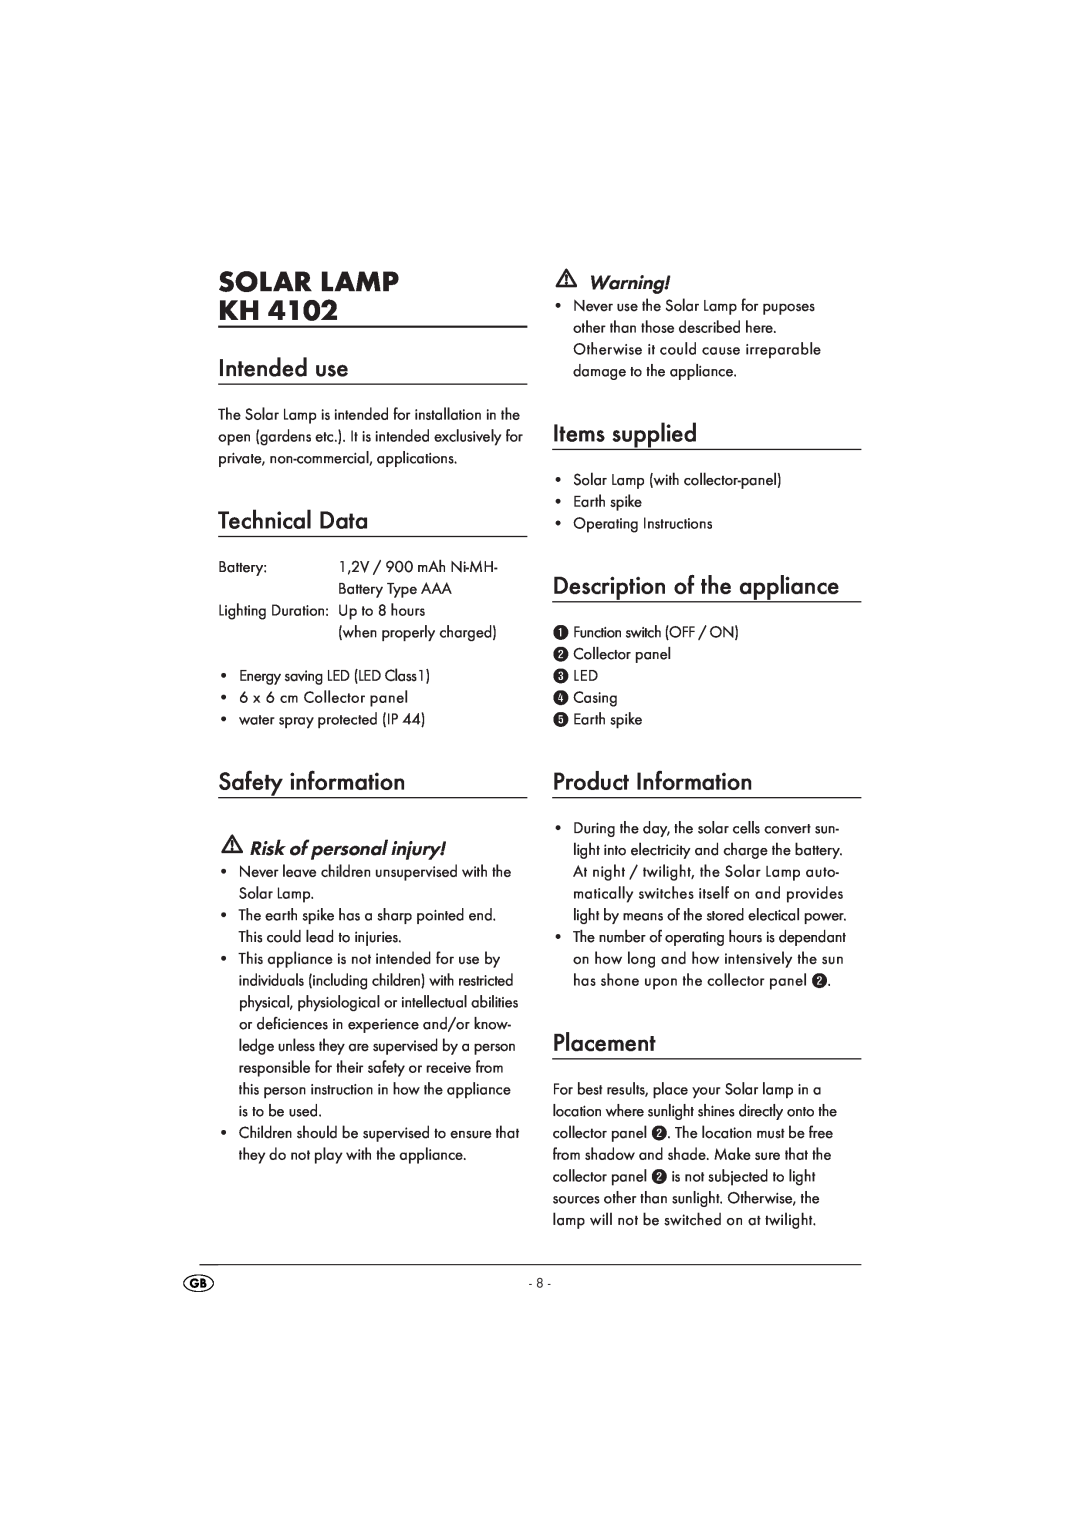 Kompernass KH 4102 Solar Lamp Kh, Intended use, Technical Data, Items supplied, Description of the appliance, Placement 